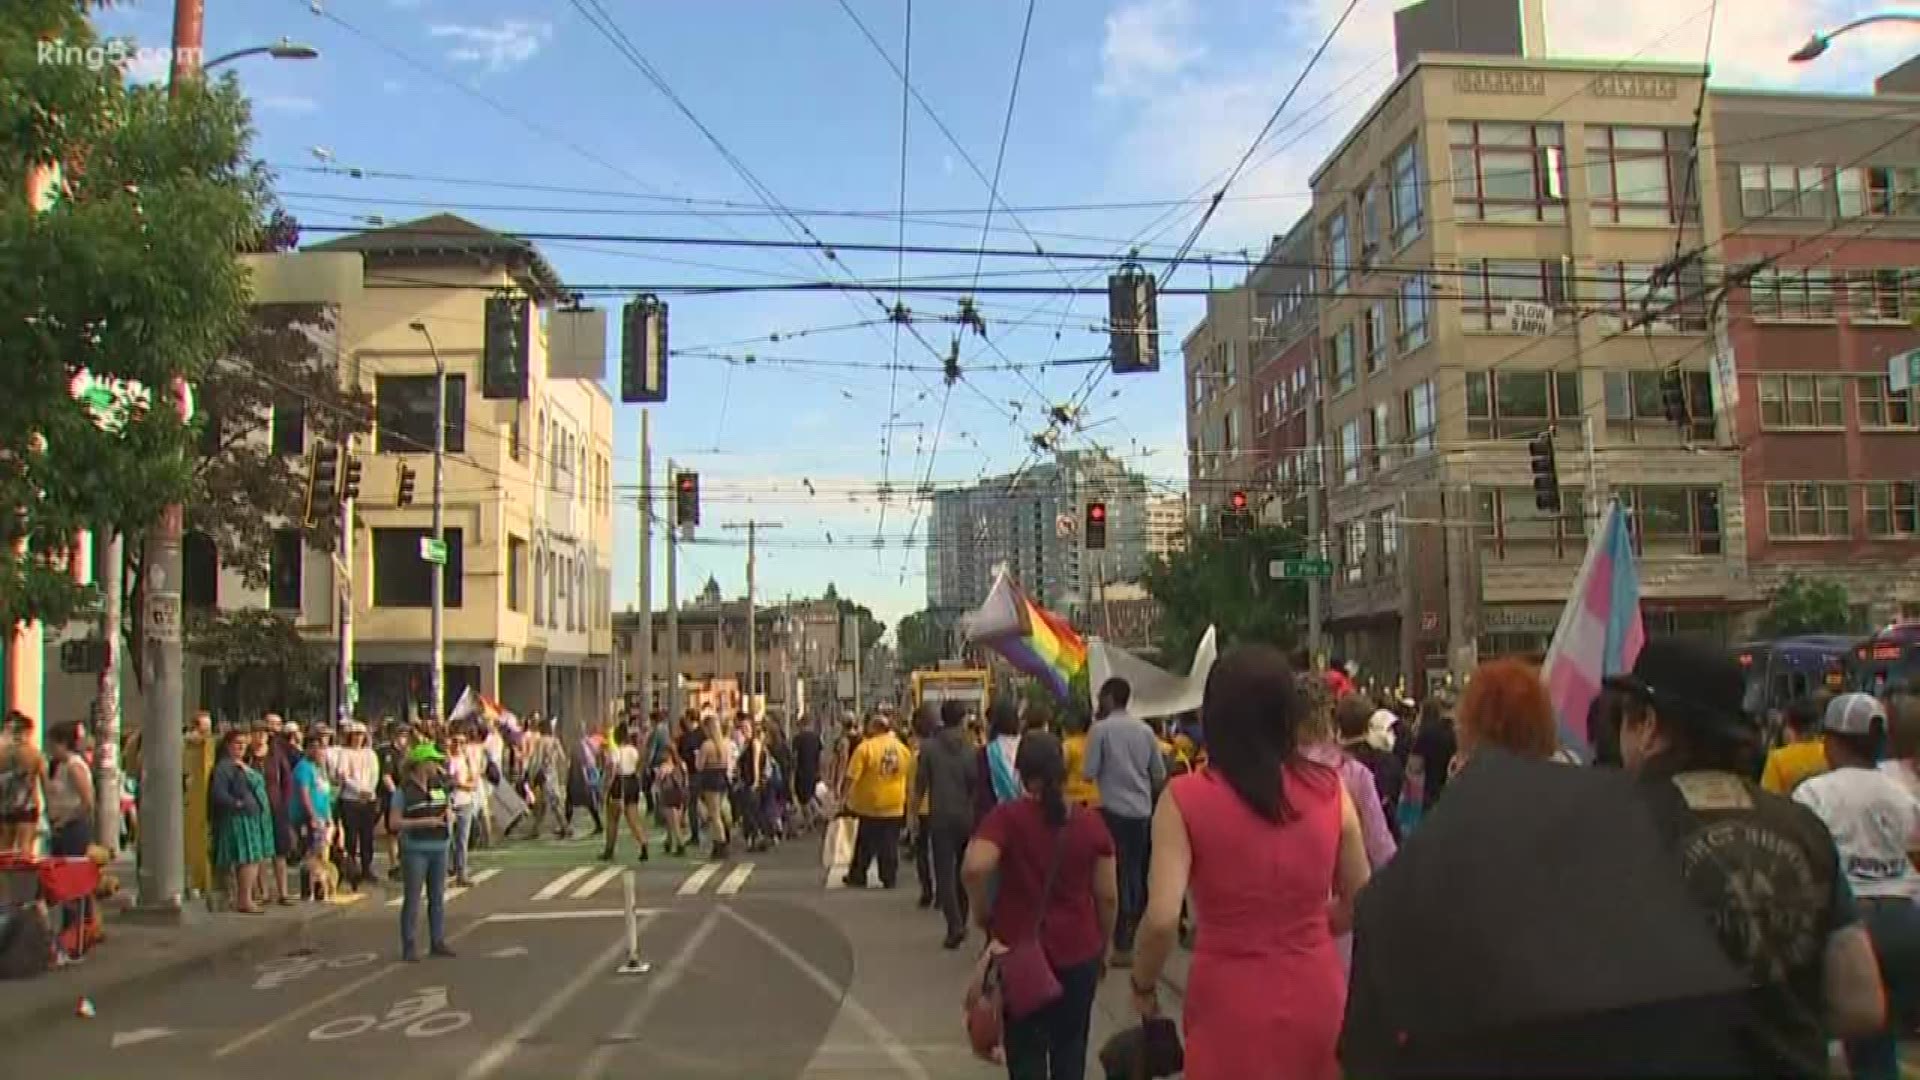 Seattle's Pride Parade takes place this Sunday.